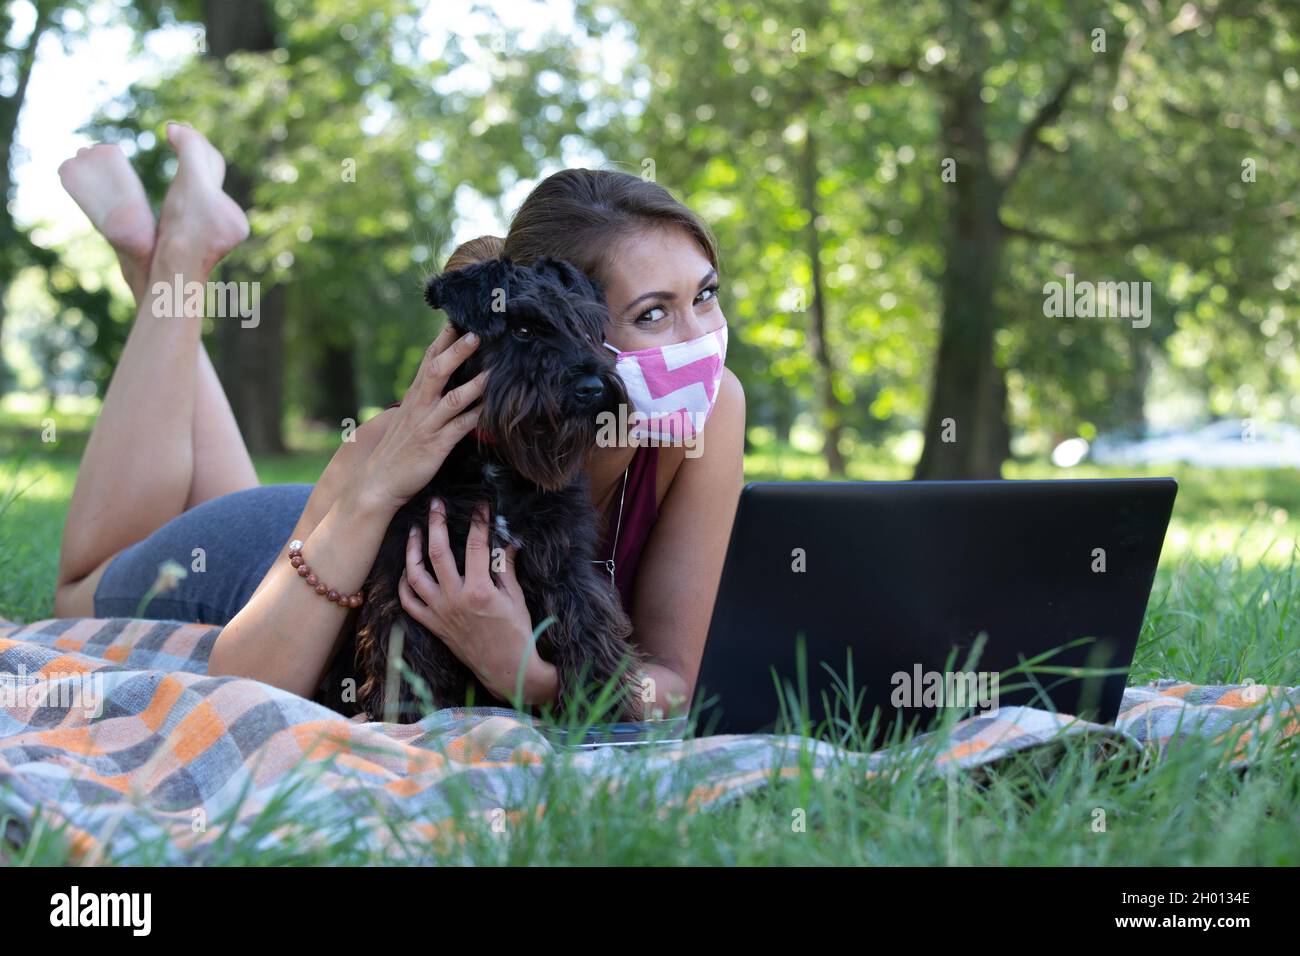 Businesswoman with protective mask working on laptop in park with dog laying next to her Stock Photo